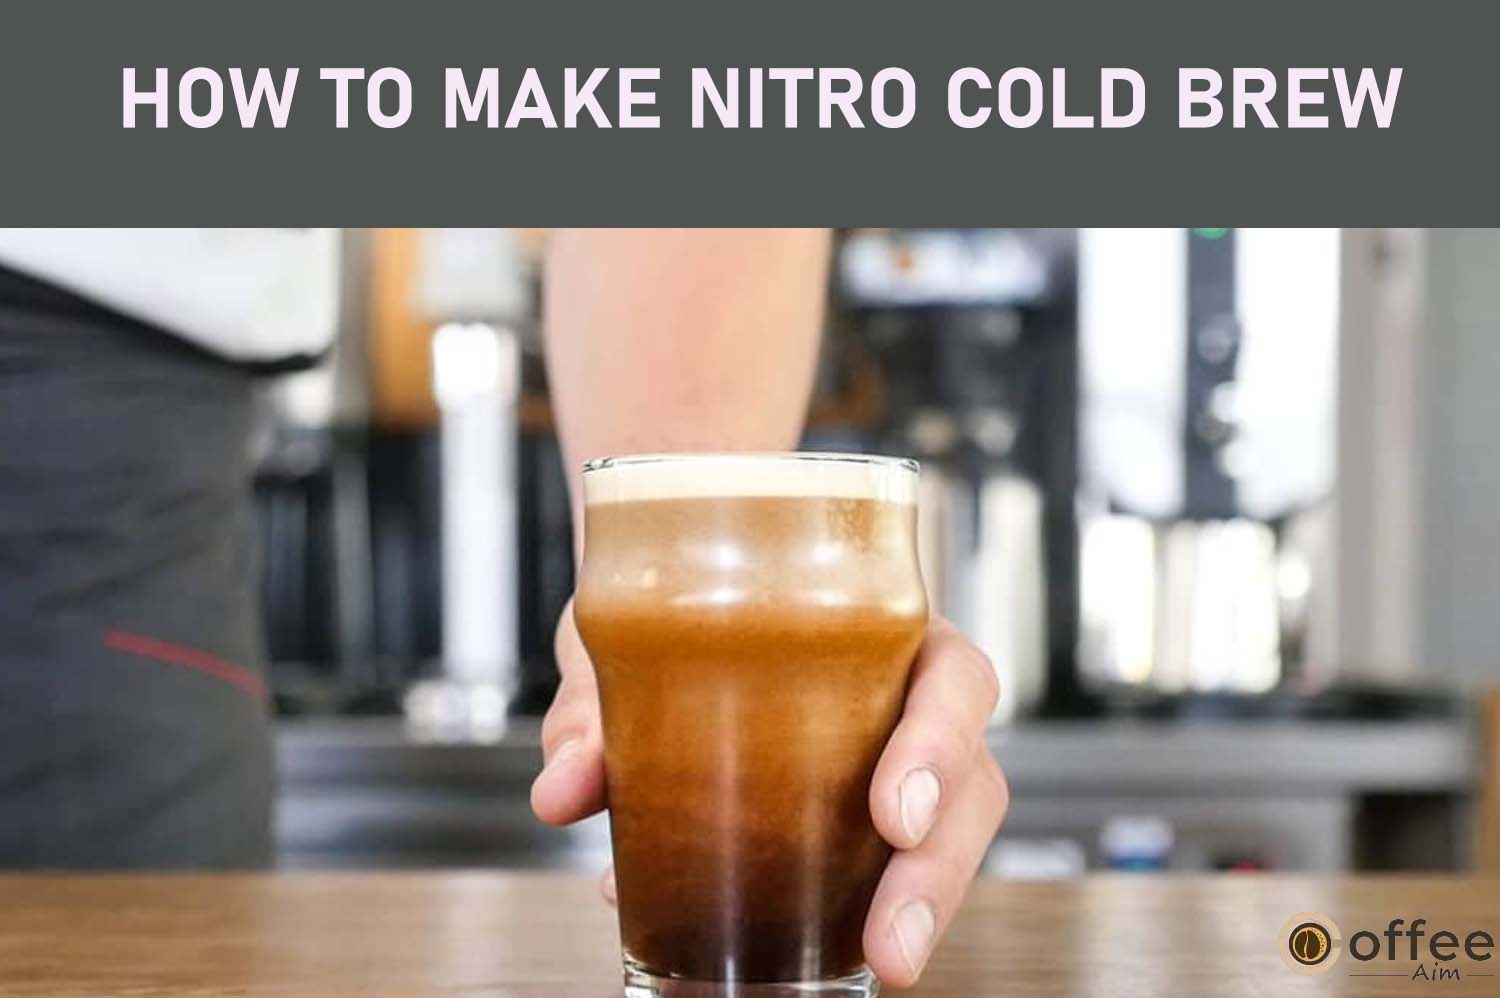 Featured image for the article "How to Make Nitro Cold Brew"